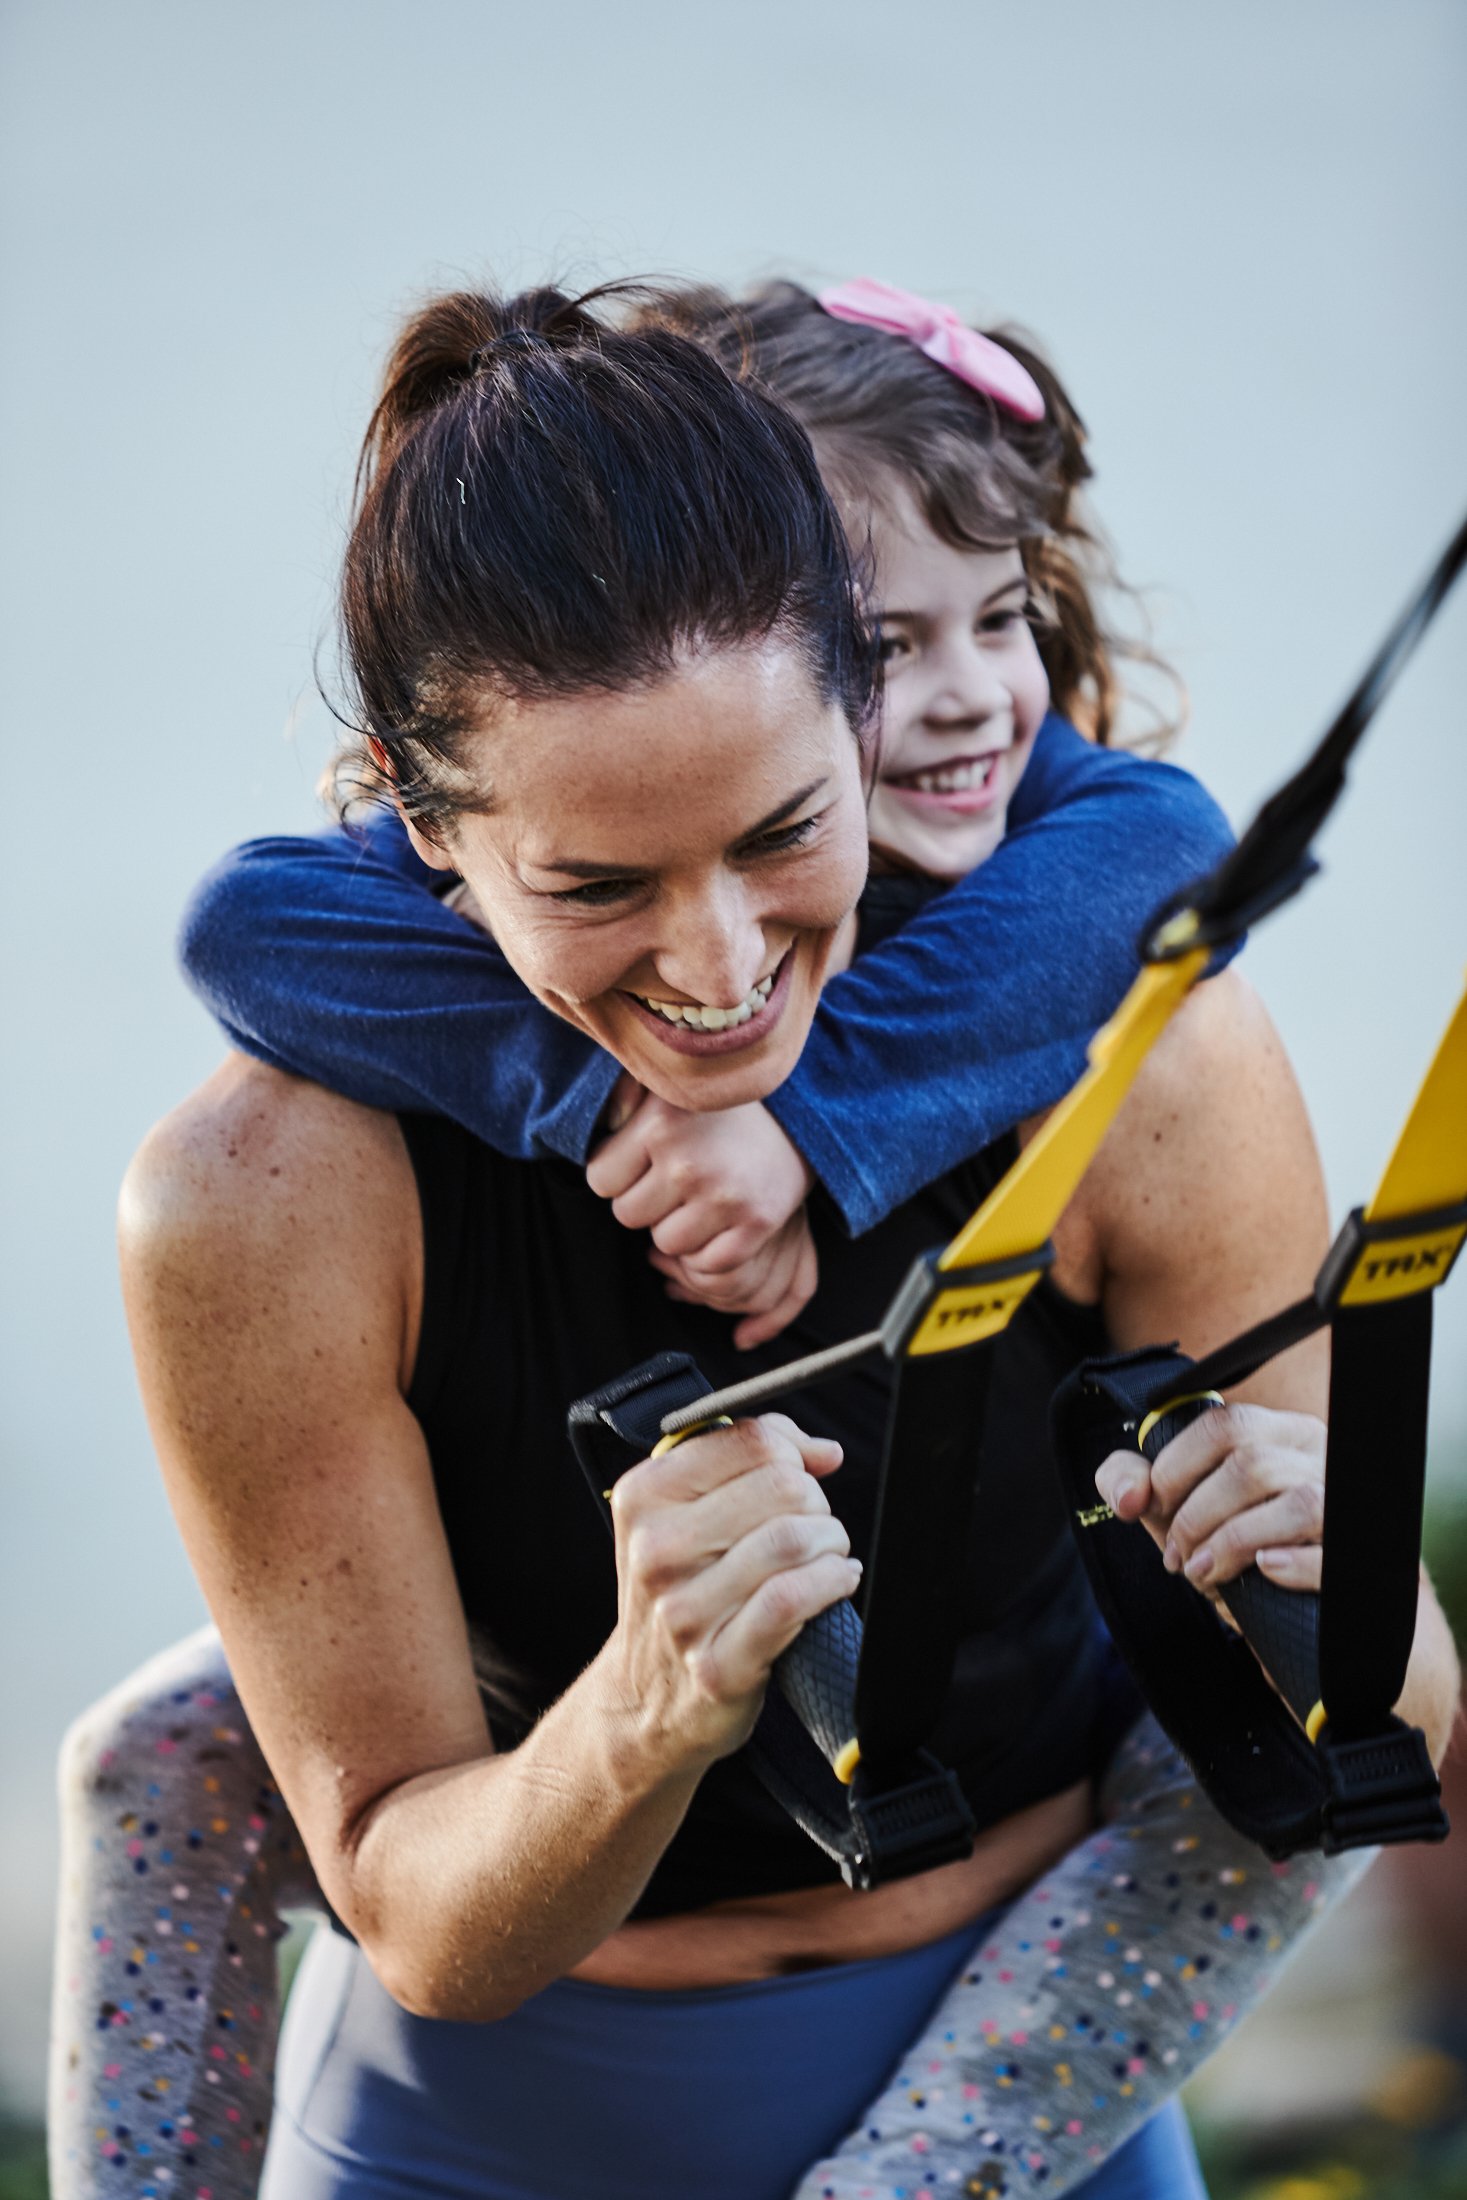 Kristin Leffel performs a TRX squat with one of her children hanging on her back